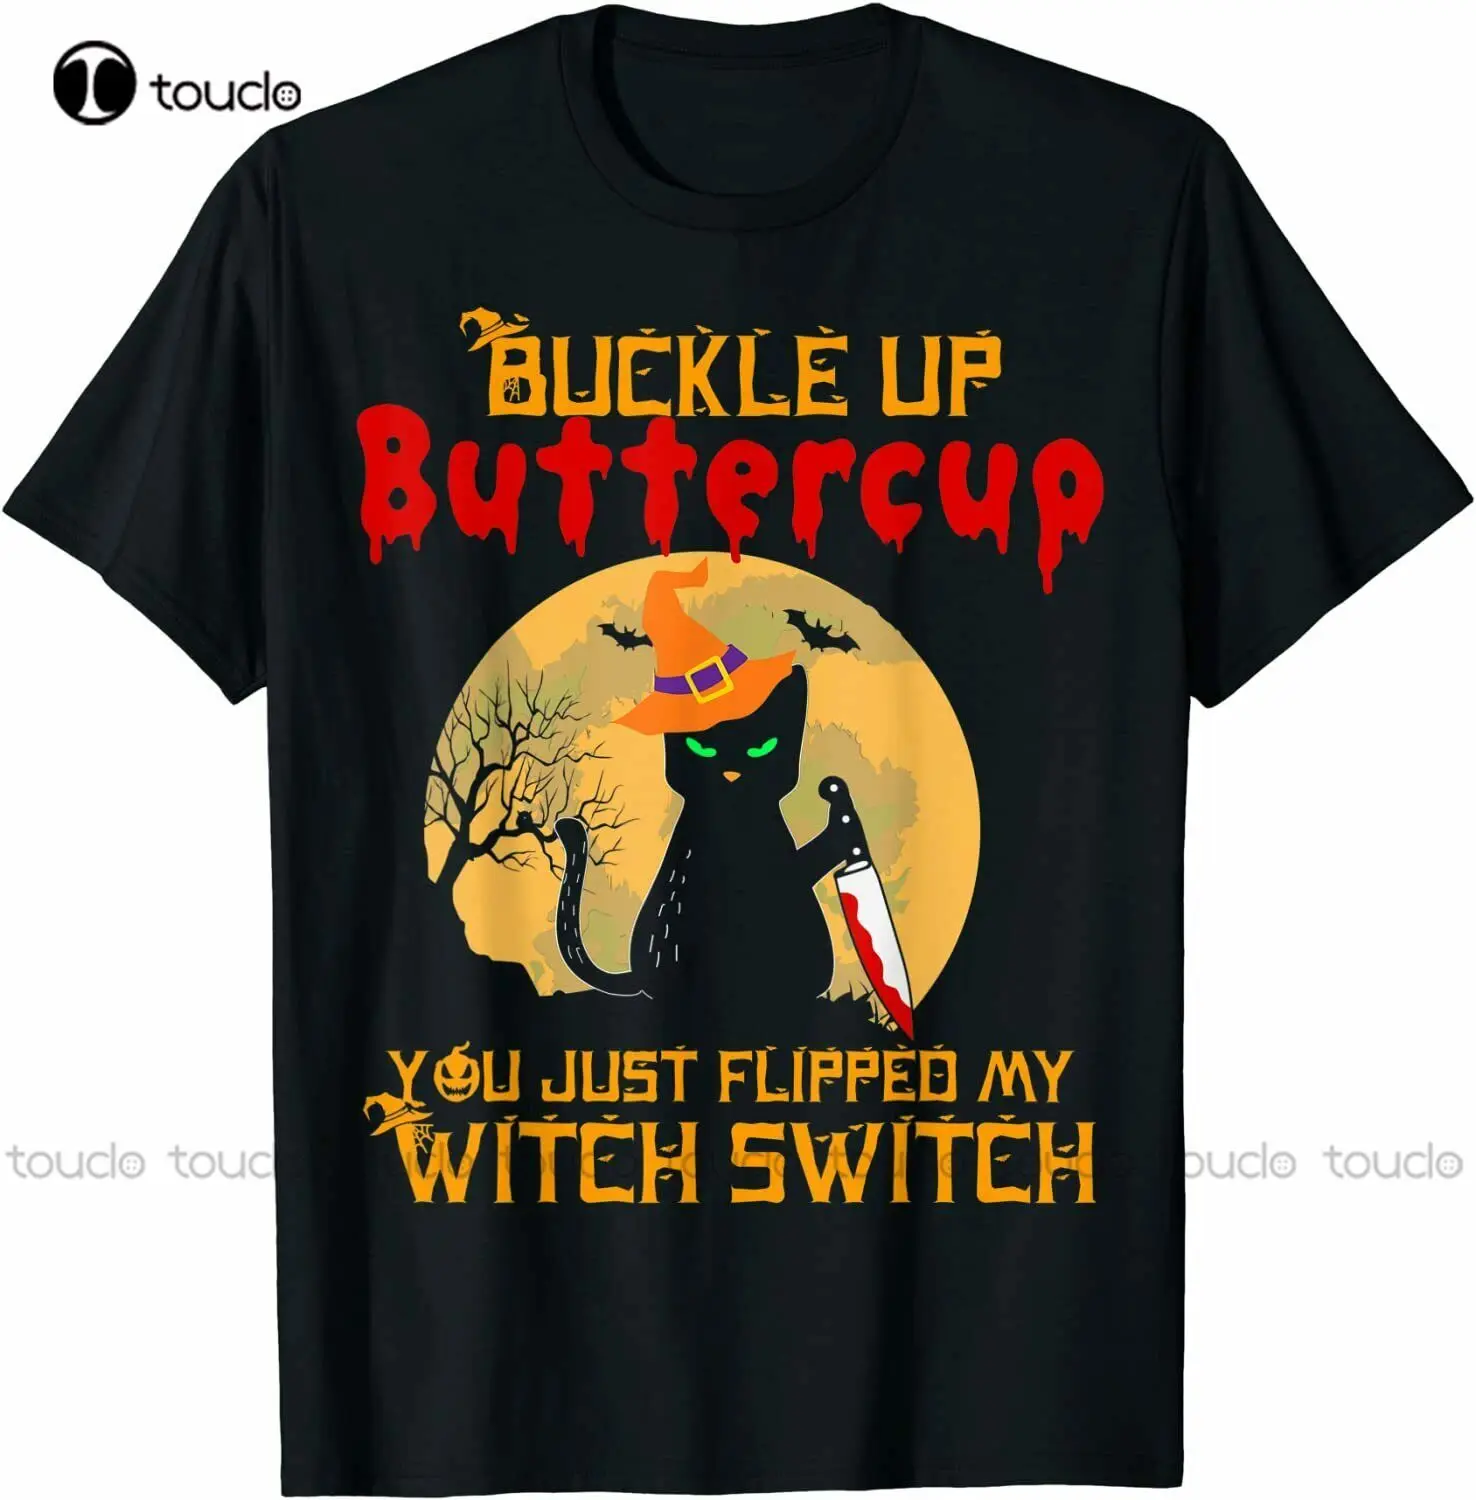 

New Buckle Up Buttercup You Just Flipped My Witch Switch Tshirt - Halloween Gift 80S Shirt